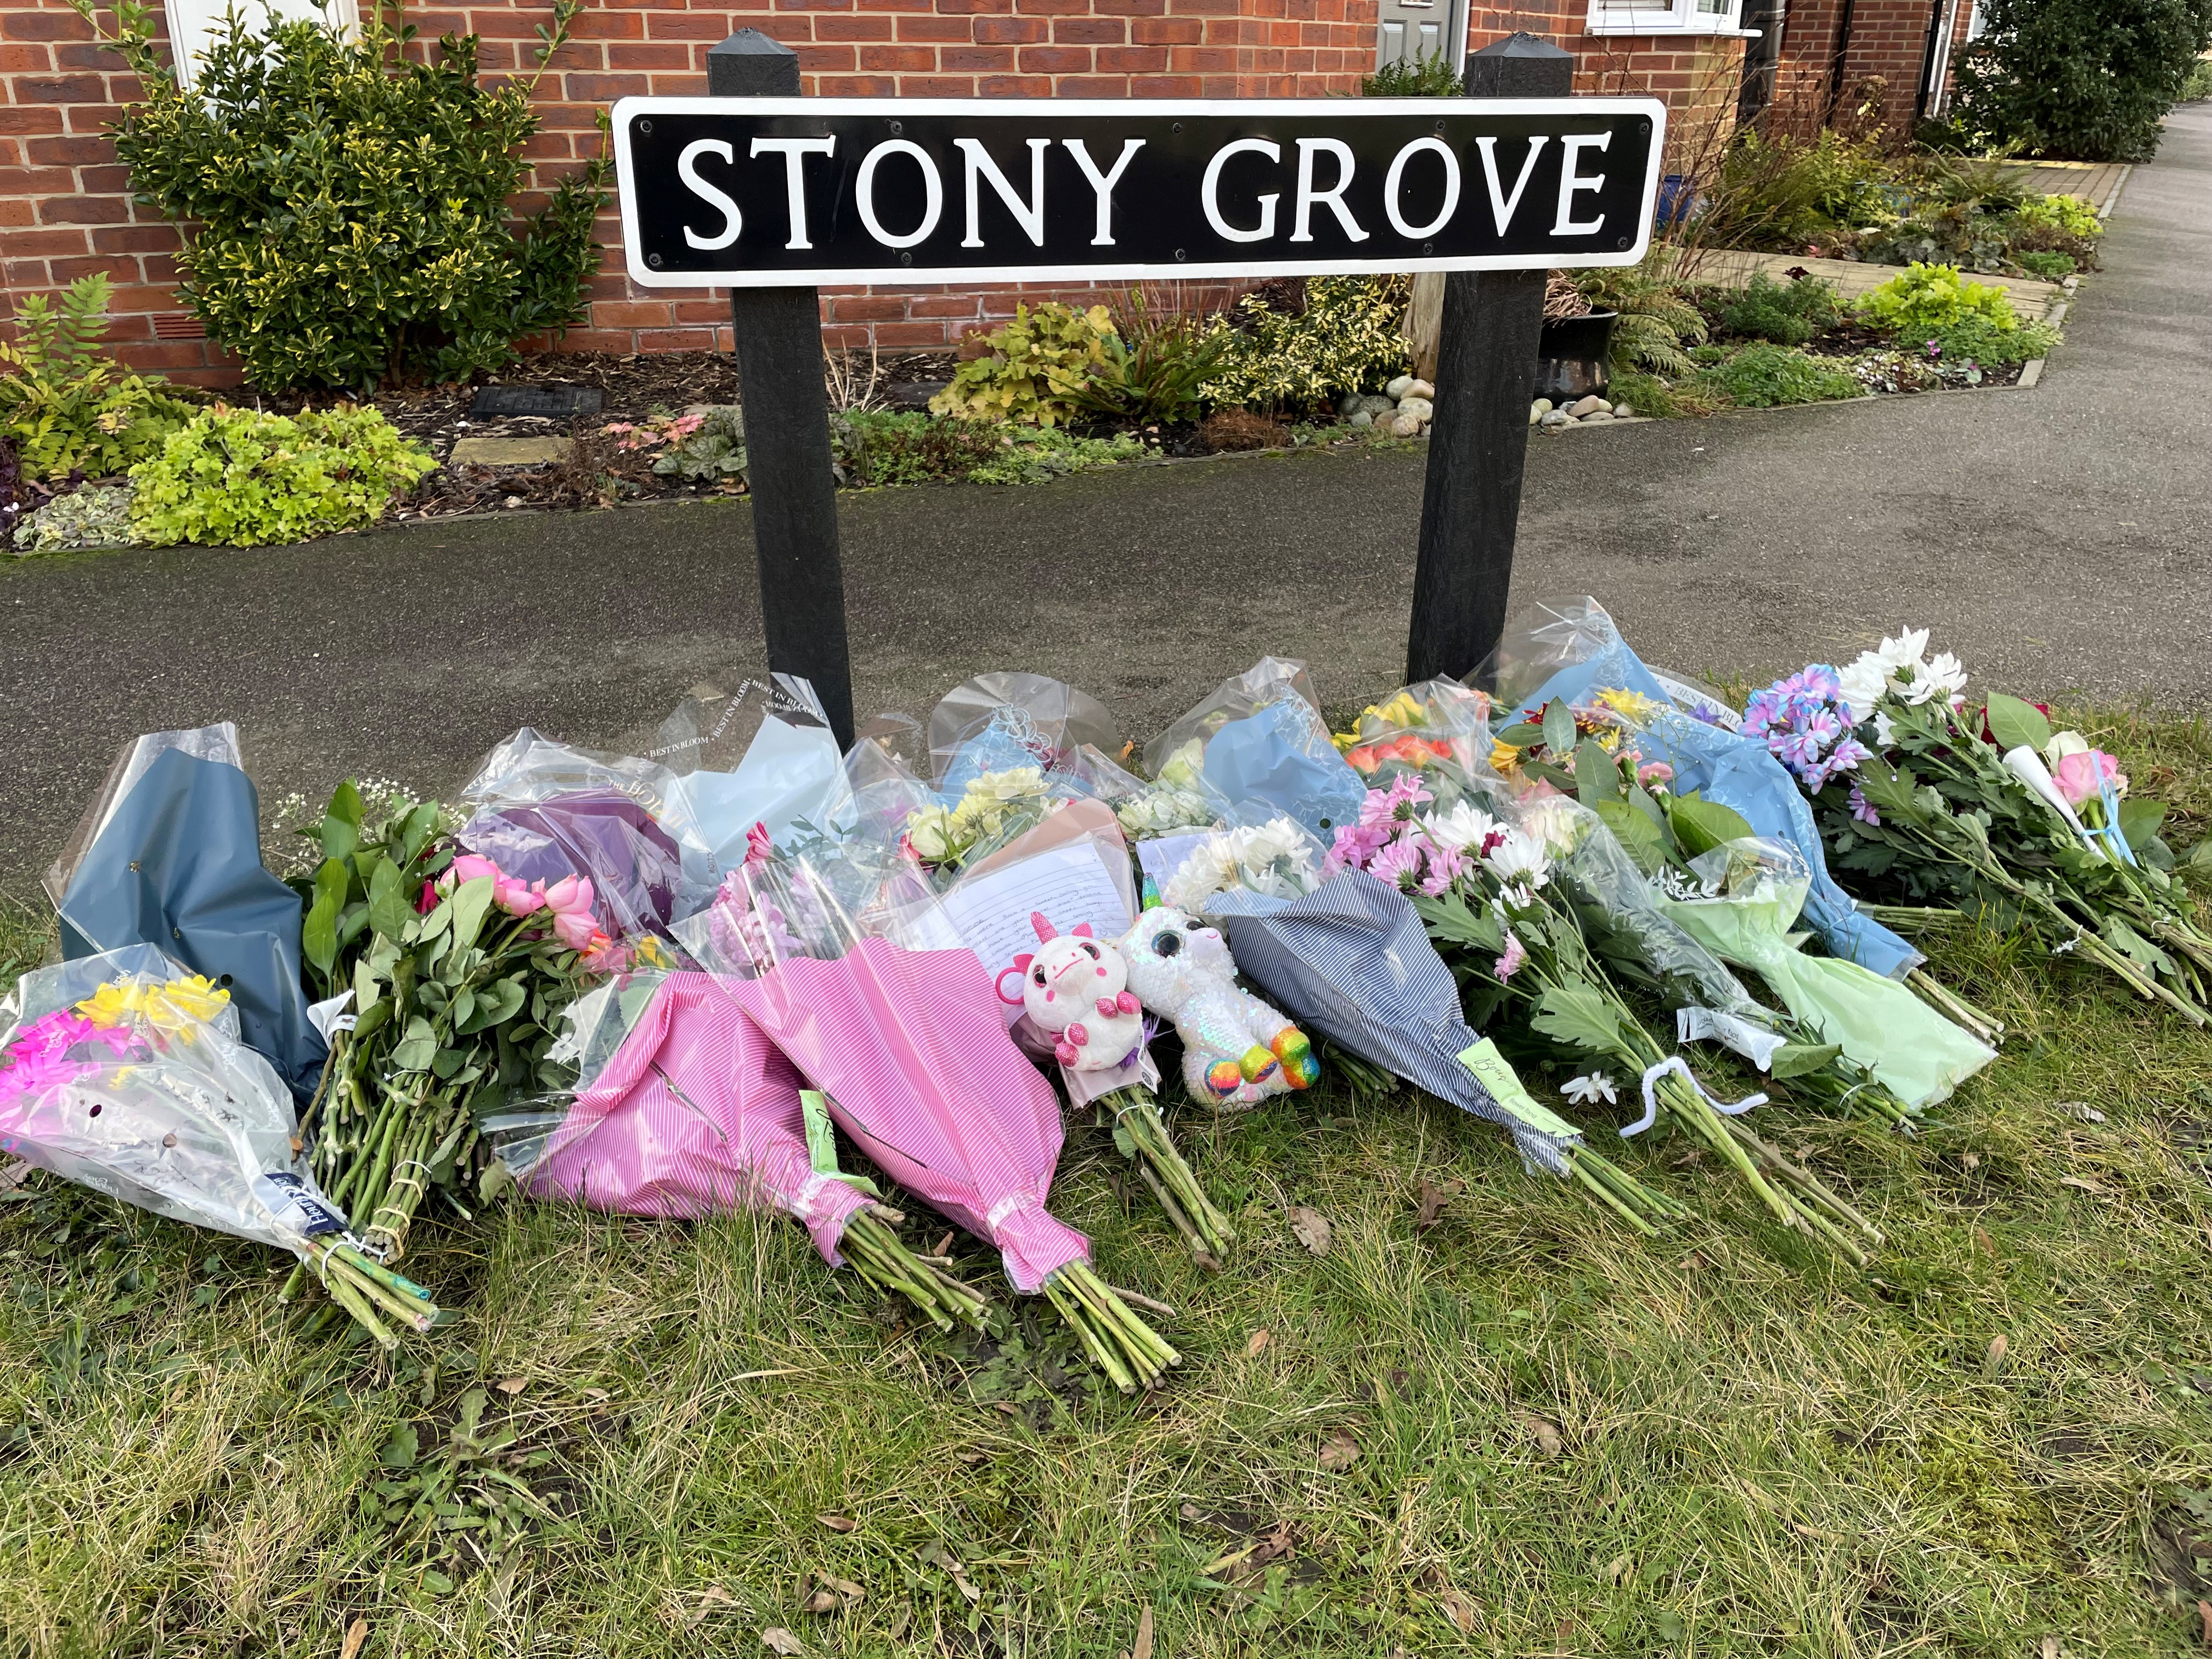 Floral tributes have been left by the sign for Stony Grove, near to the house in Allan Bedford Crescent in Costessey, Norfolk. (Sam Russell/ PA)